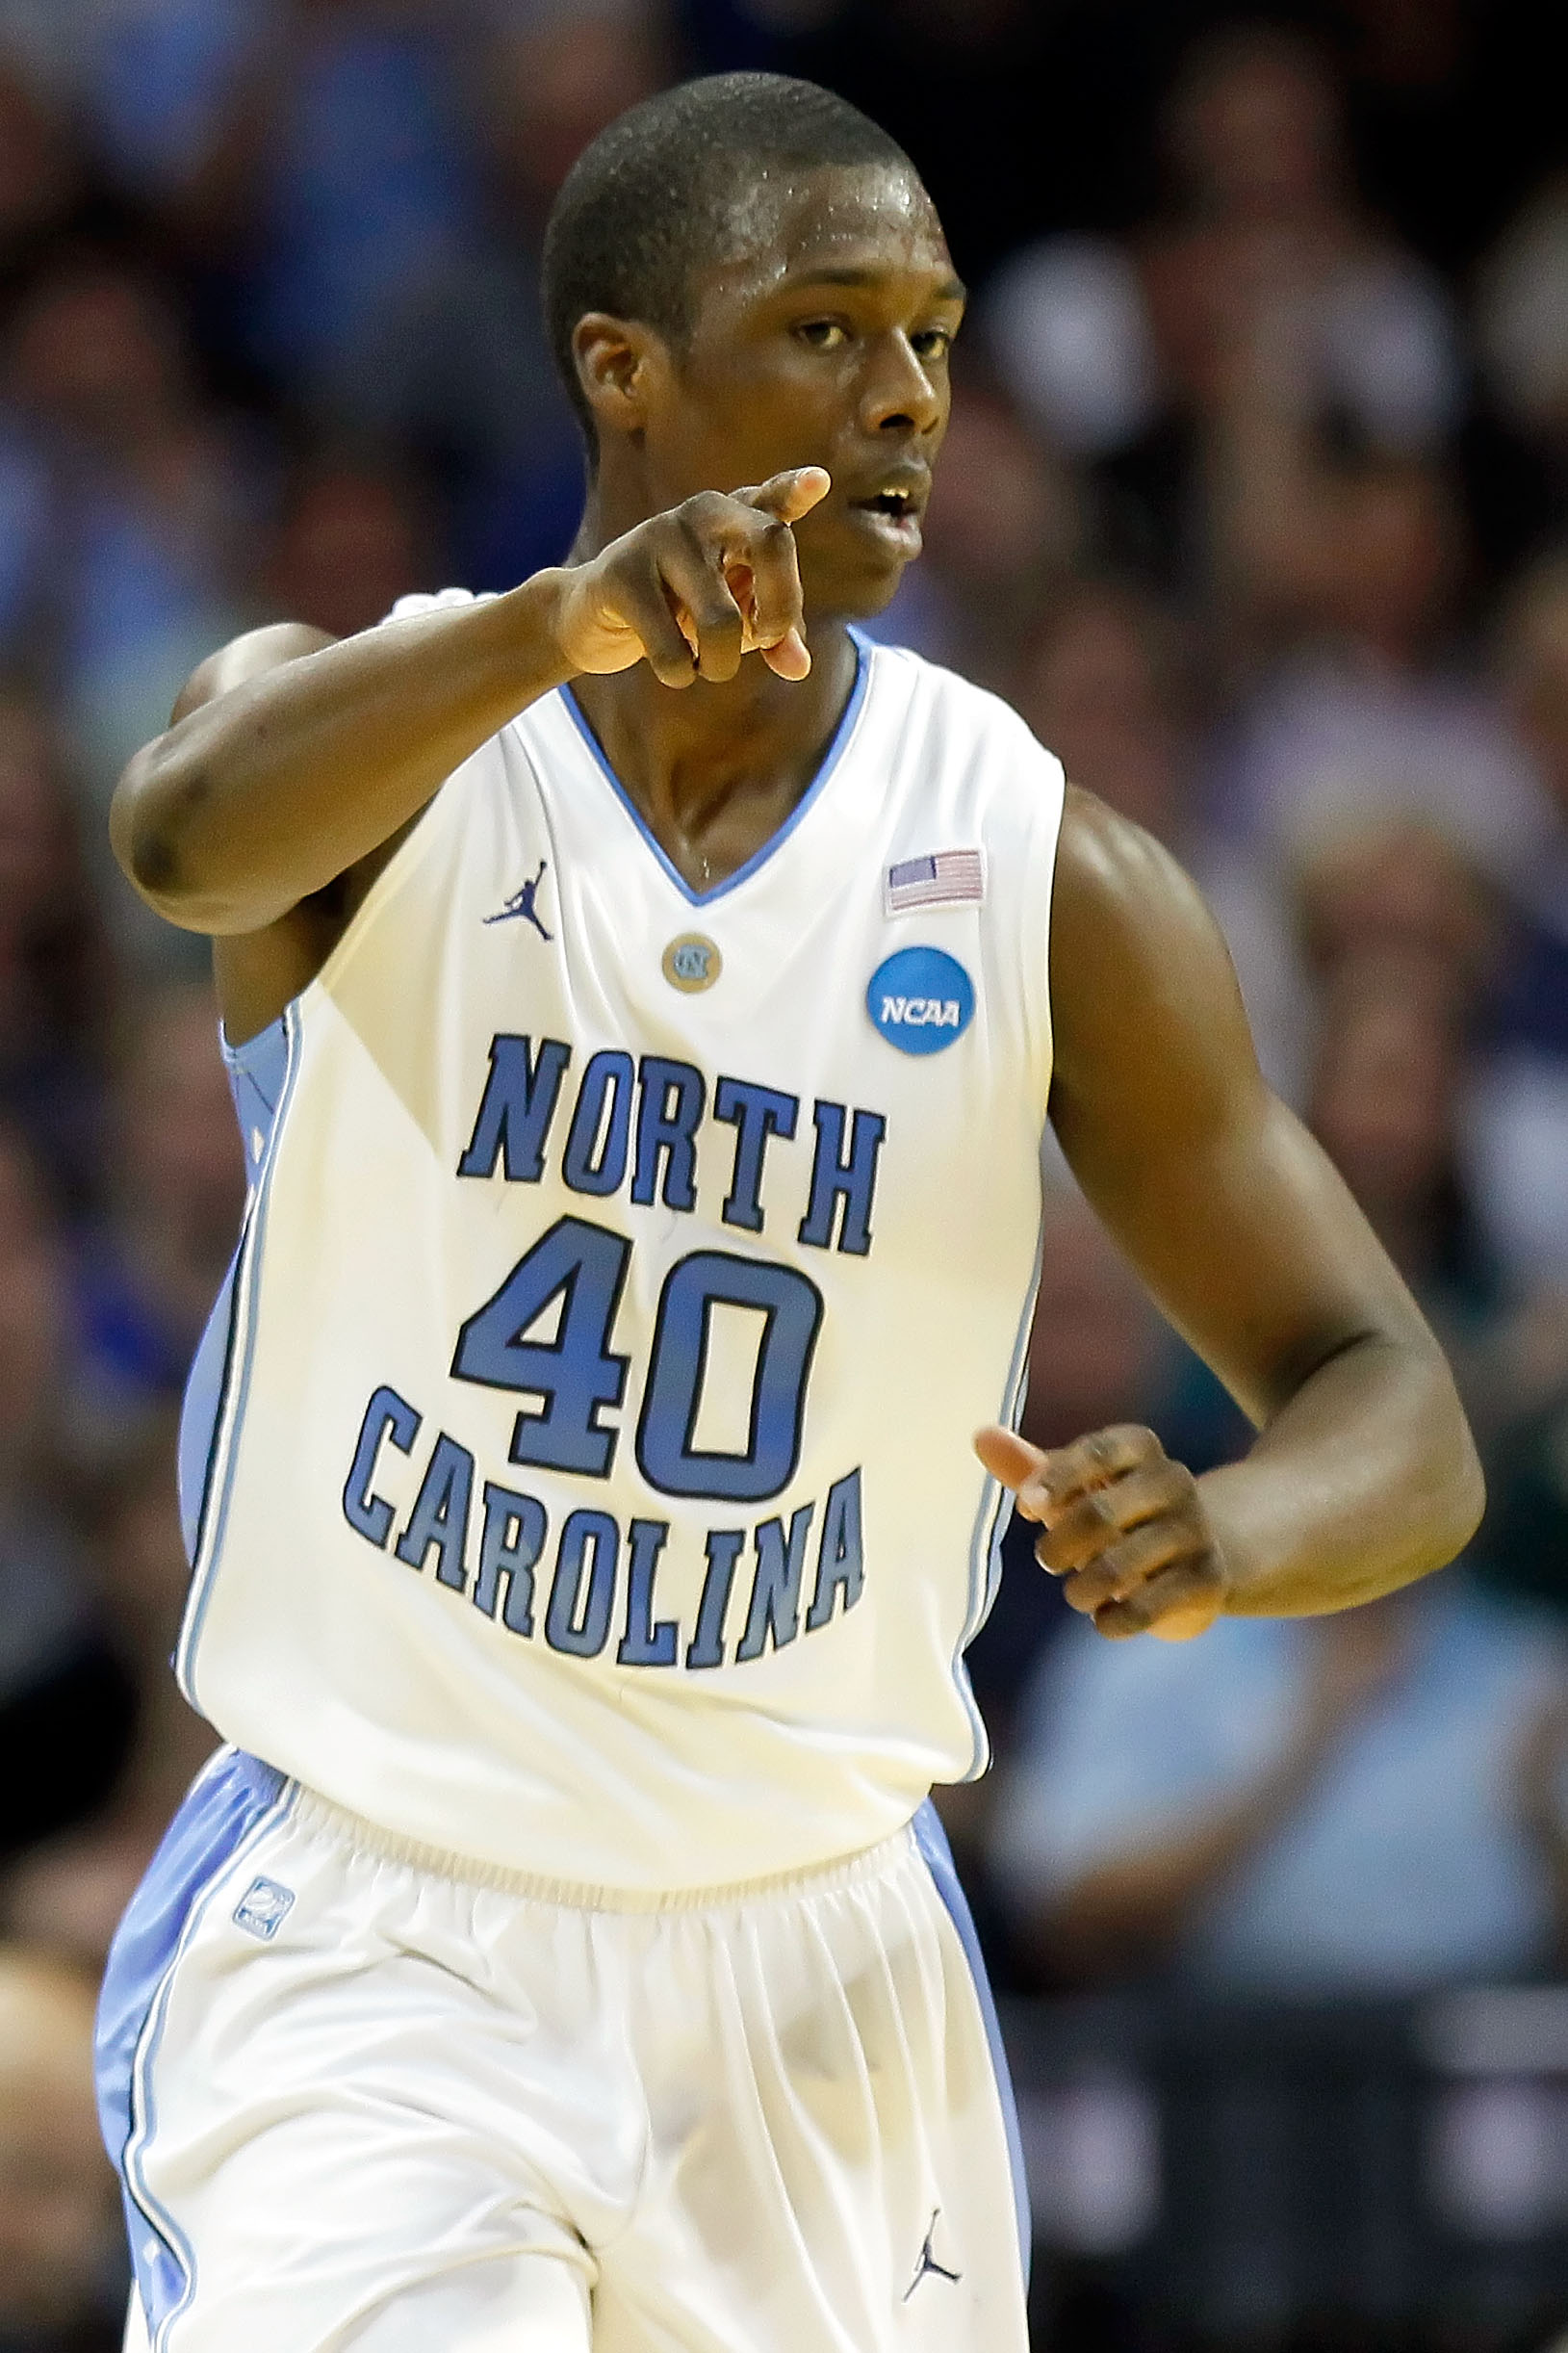 CHARLOTTE, NC - MARCH 20:  Harrison Barnes #40 of the North Carolina Tar Heels reacts in the first half while taking on the Washington Huskies during the third round of the 2011 NCAA men's basketball tournament at Time Warner Cable Arena on March 20, 2011